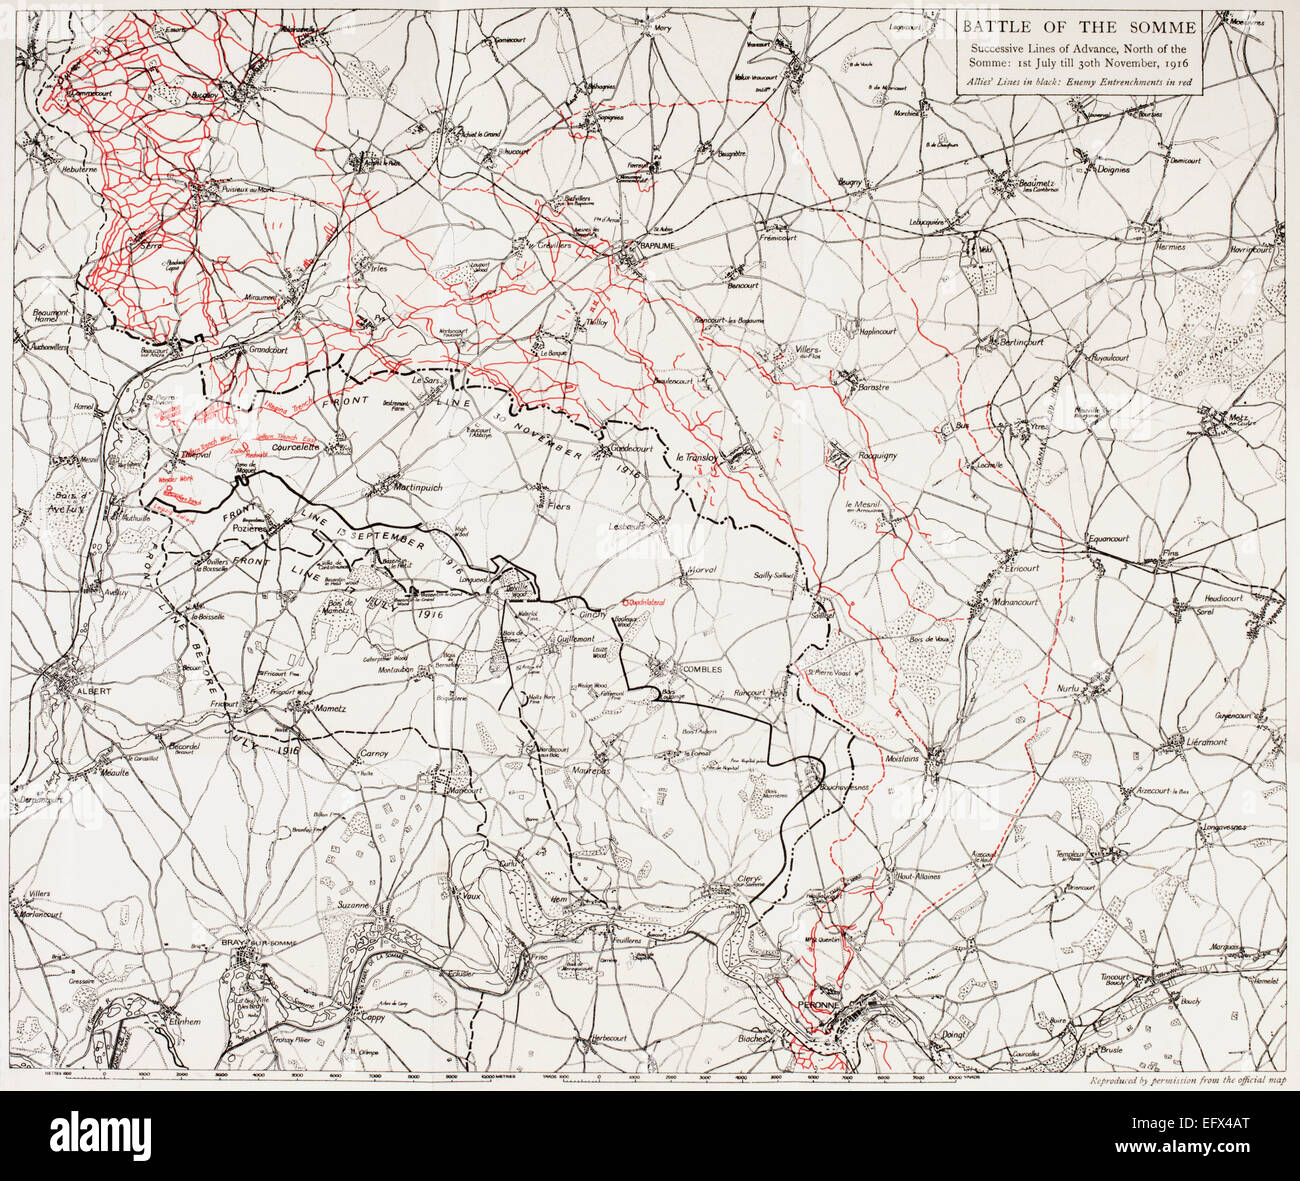 Map of the Battle of the Somme, or the Somme Offensive in the First World War. Successive lines of the British and French advance are shown in black, German lines are shown in red and pertain to the whole battle, July 1, 1916 to November 30, 1916. Stock Photo